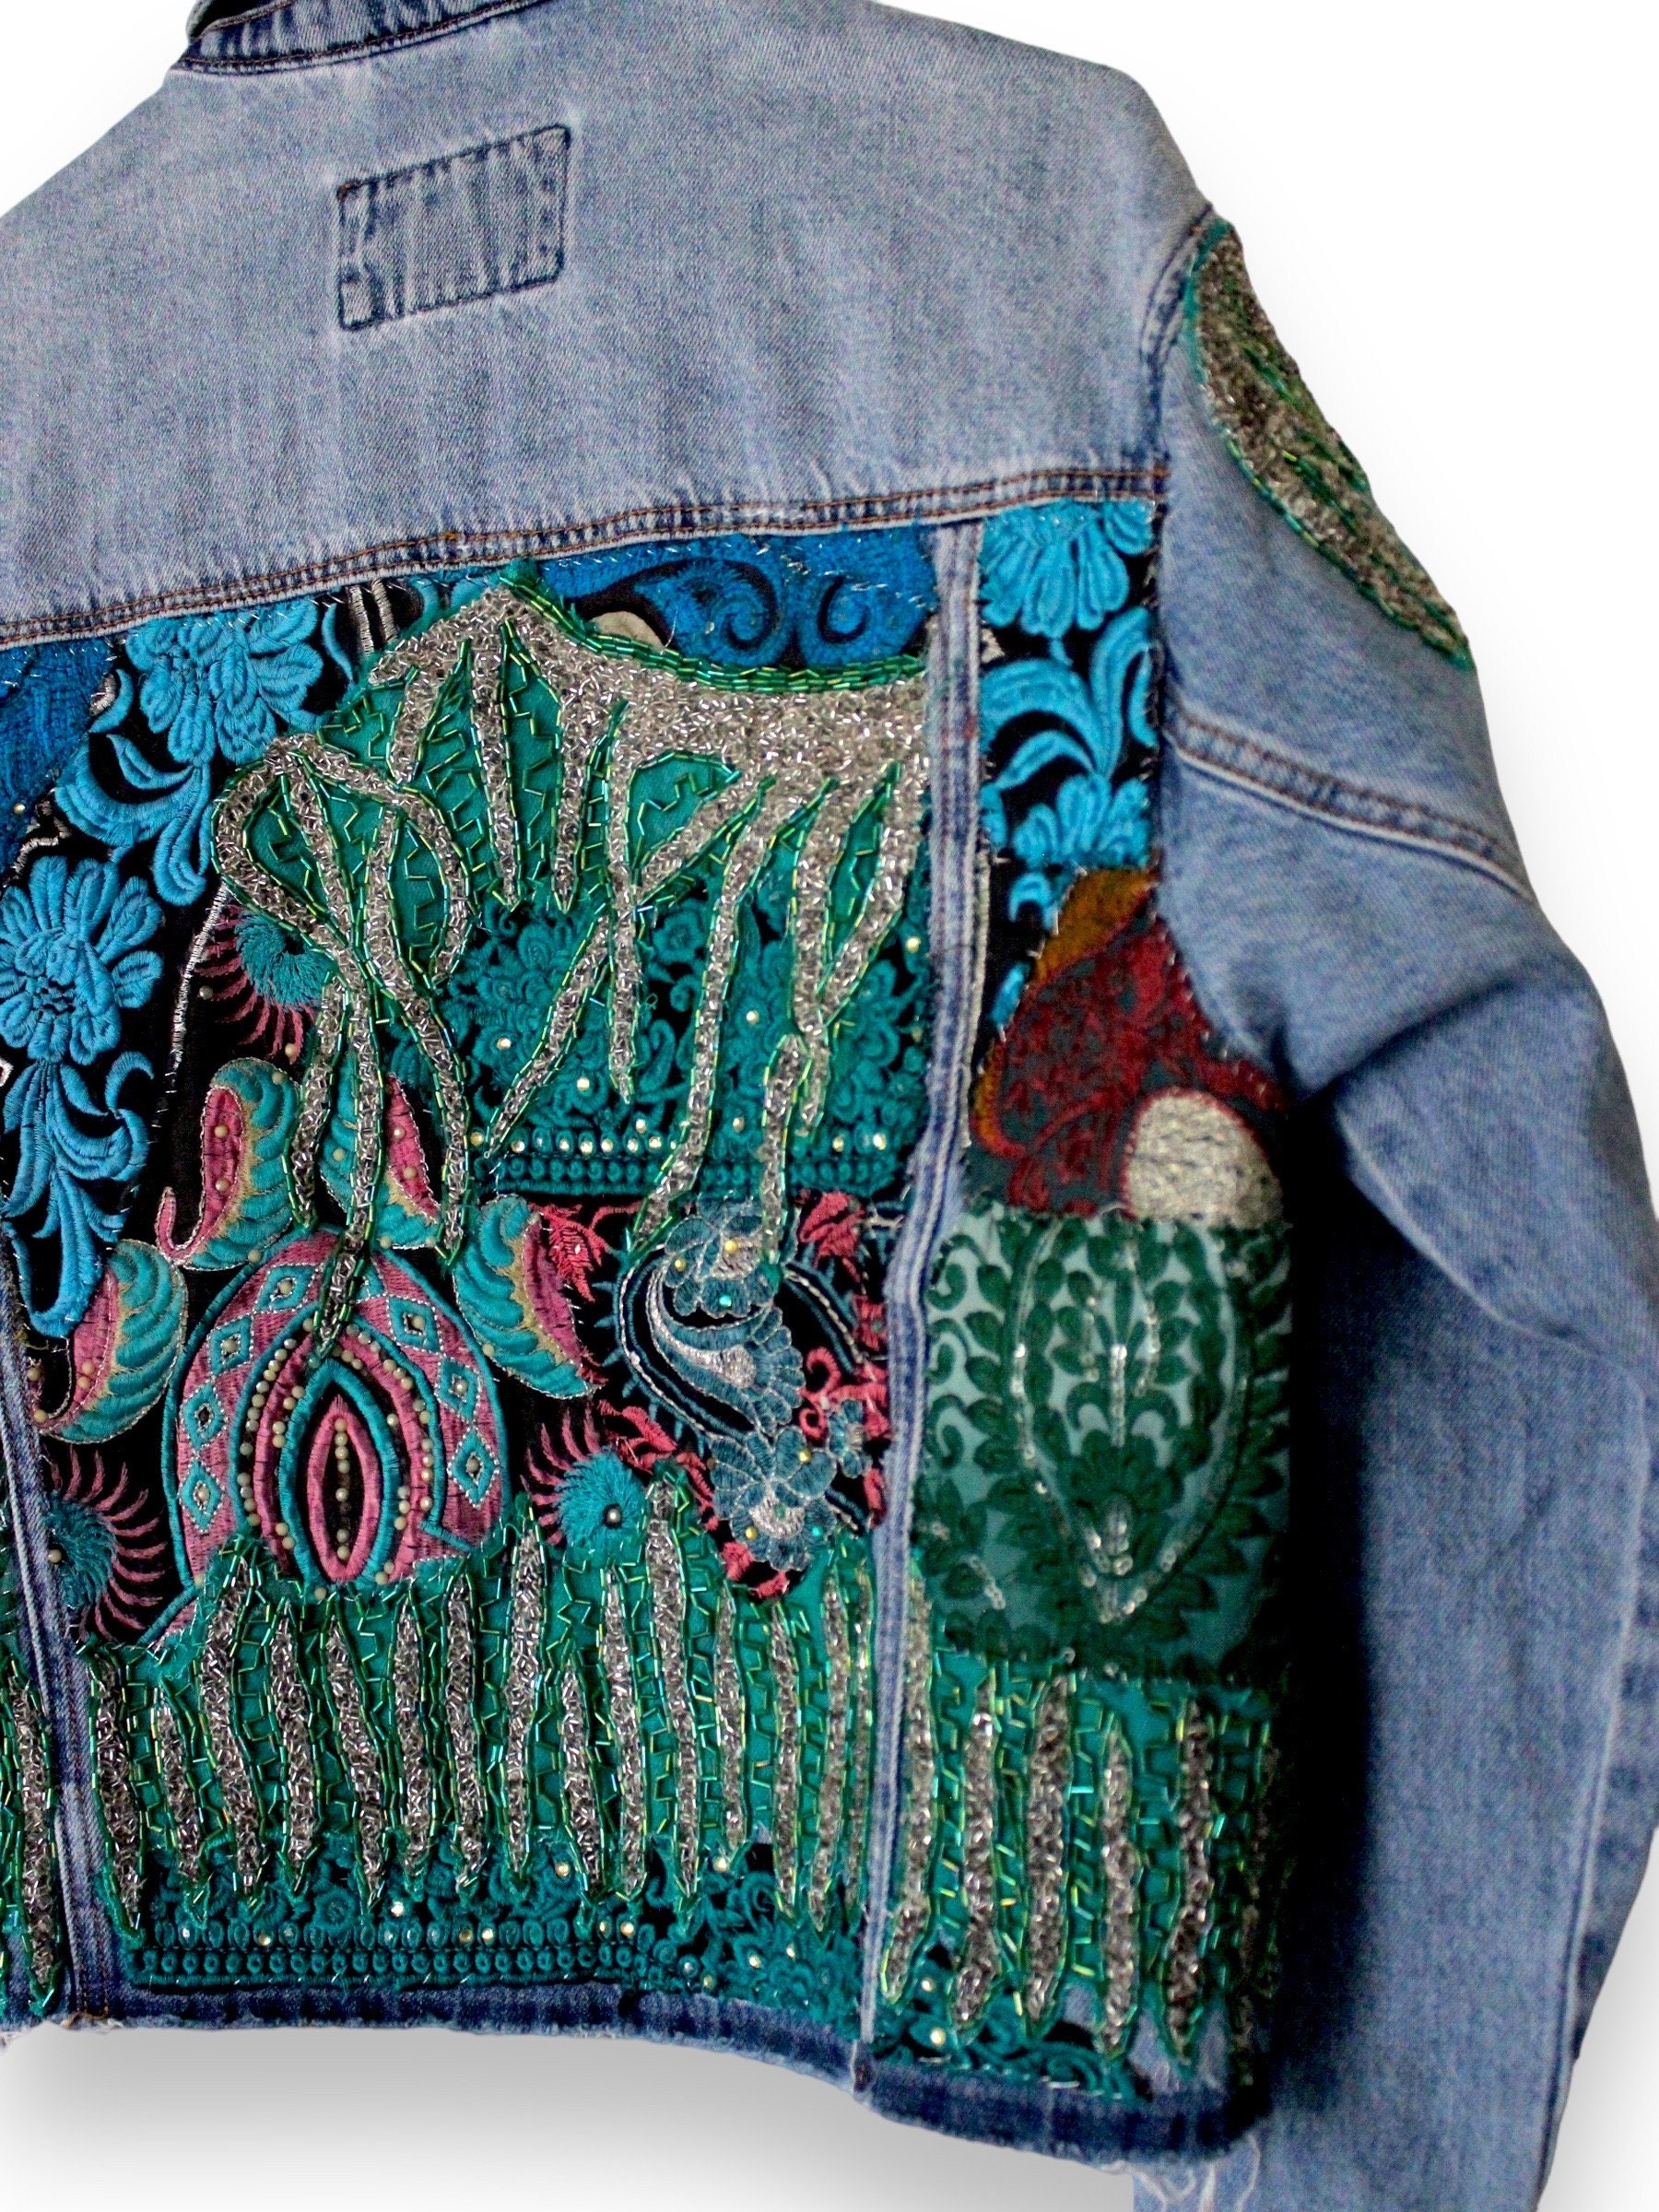 Embroidered Reworked Denim Jacket / Upcycling Embroidered - Etsy